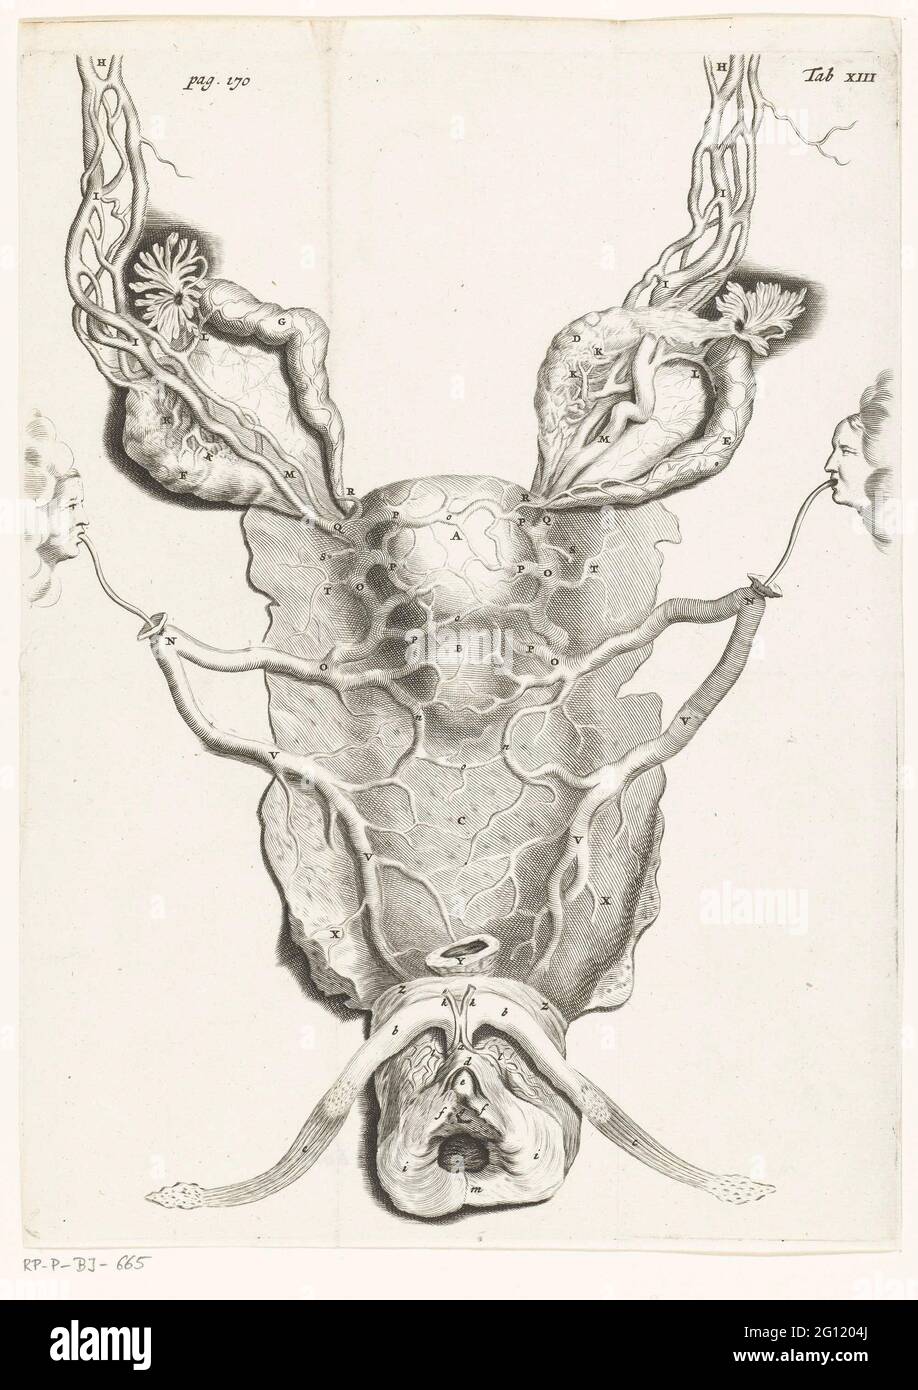 Womb (uterus), enlarged. In 1672, physician and anatomist Reinier de Graaf published his De mulierum organis about the female reproductive organs, with anatomically correct prints by Hendrik Bary, and some with little jokes. De Graaf was the first to conclude that a foetus was the product not just of a man’s seed, but also of a woman’s egg. He discovered what he called blisters, which later became known as Graafian follicles. Stock Photo